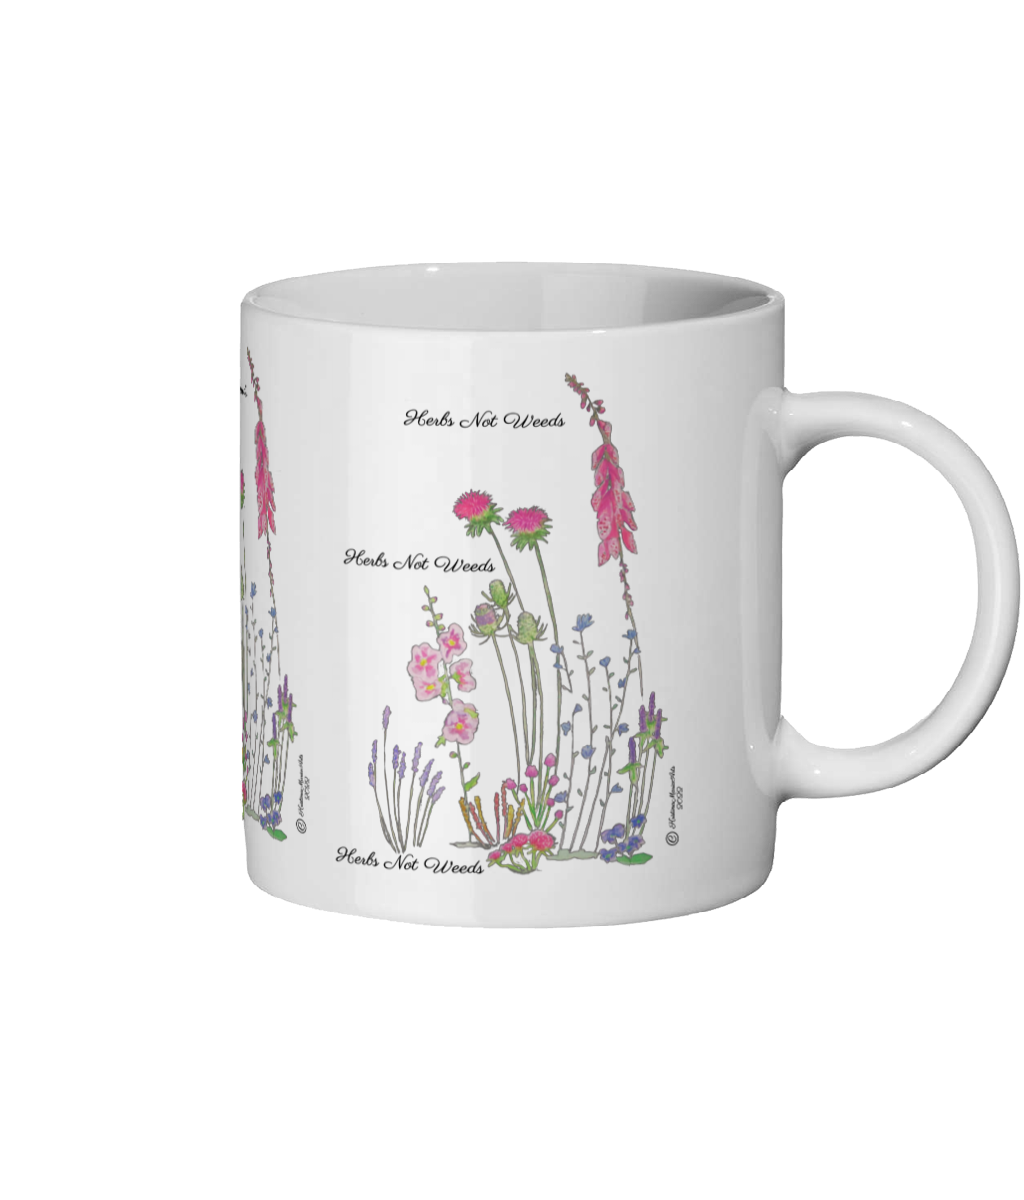 White Mug, Cup with wild flowers and herbs design